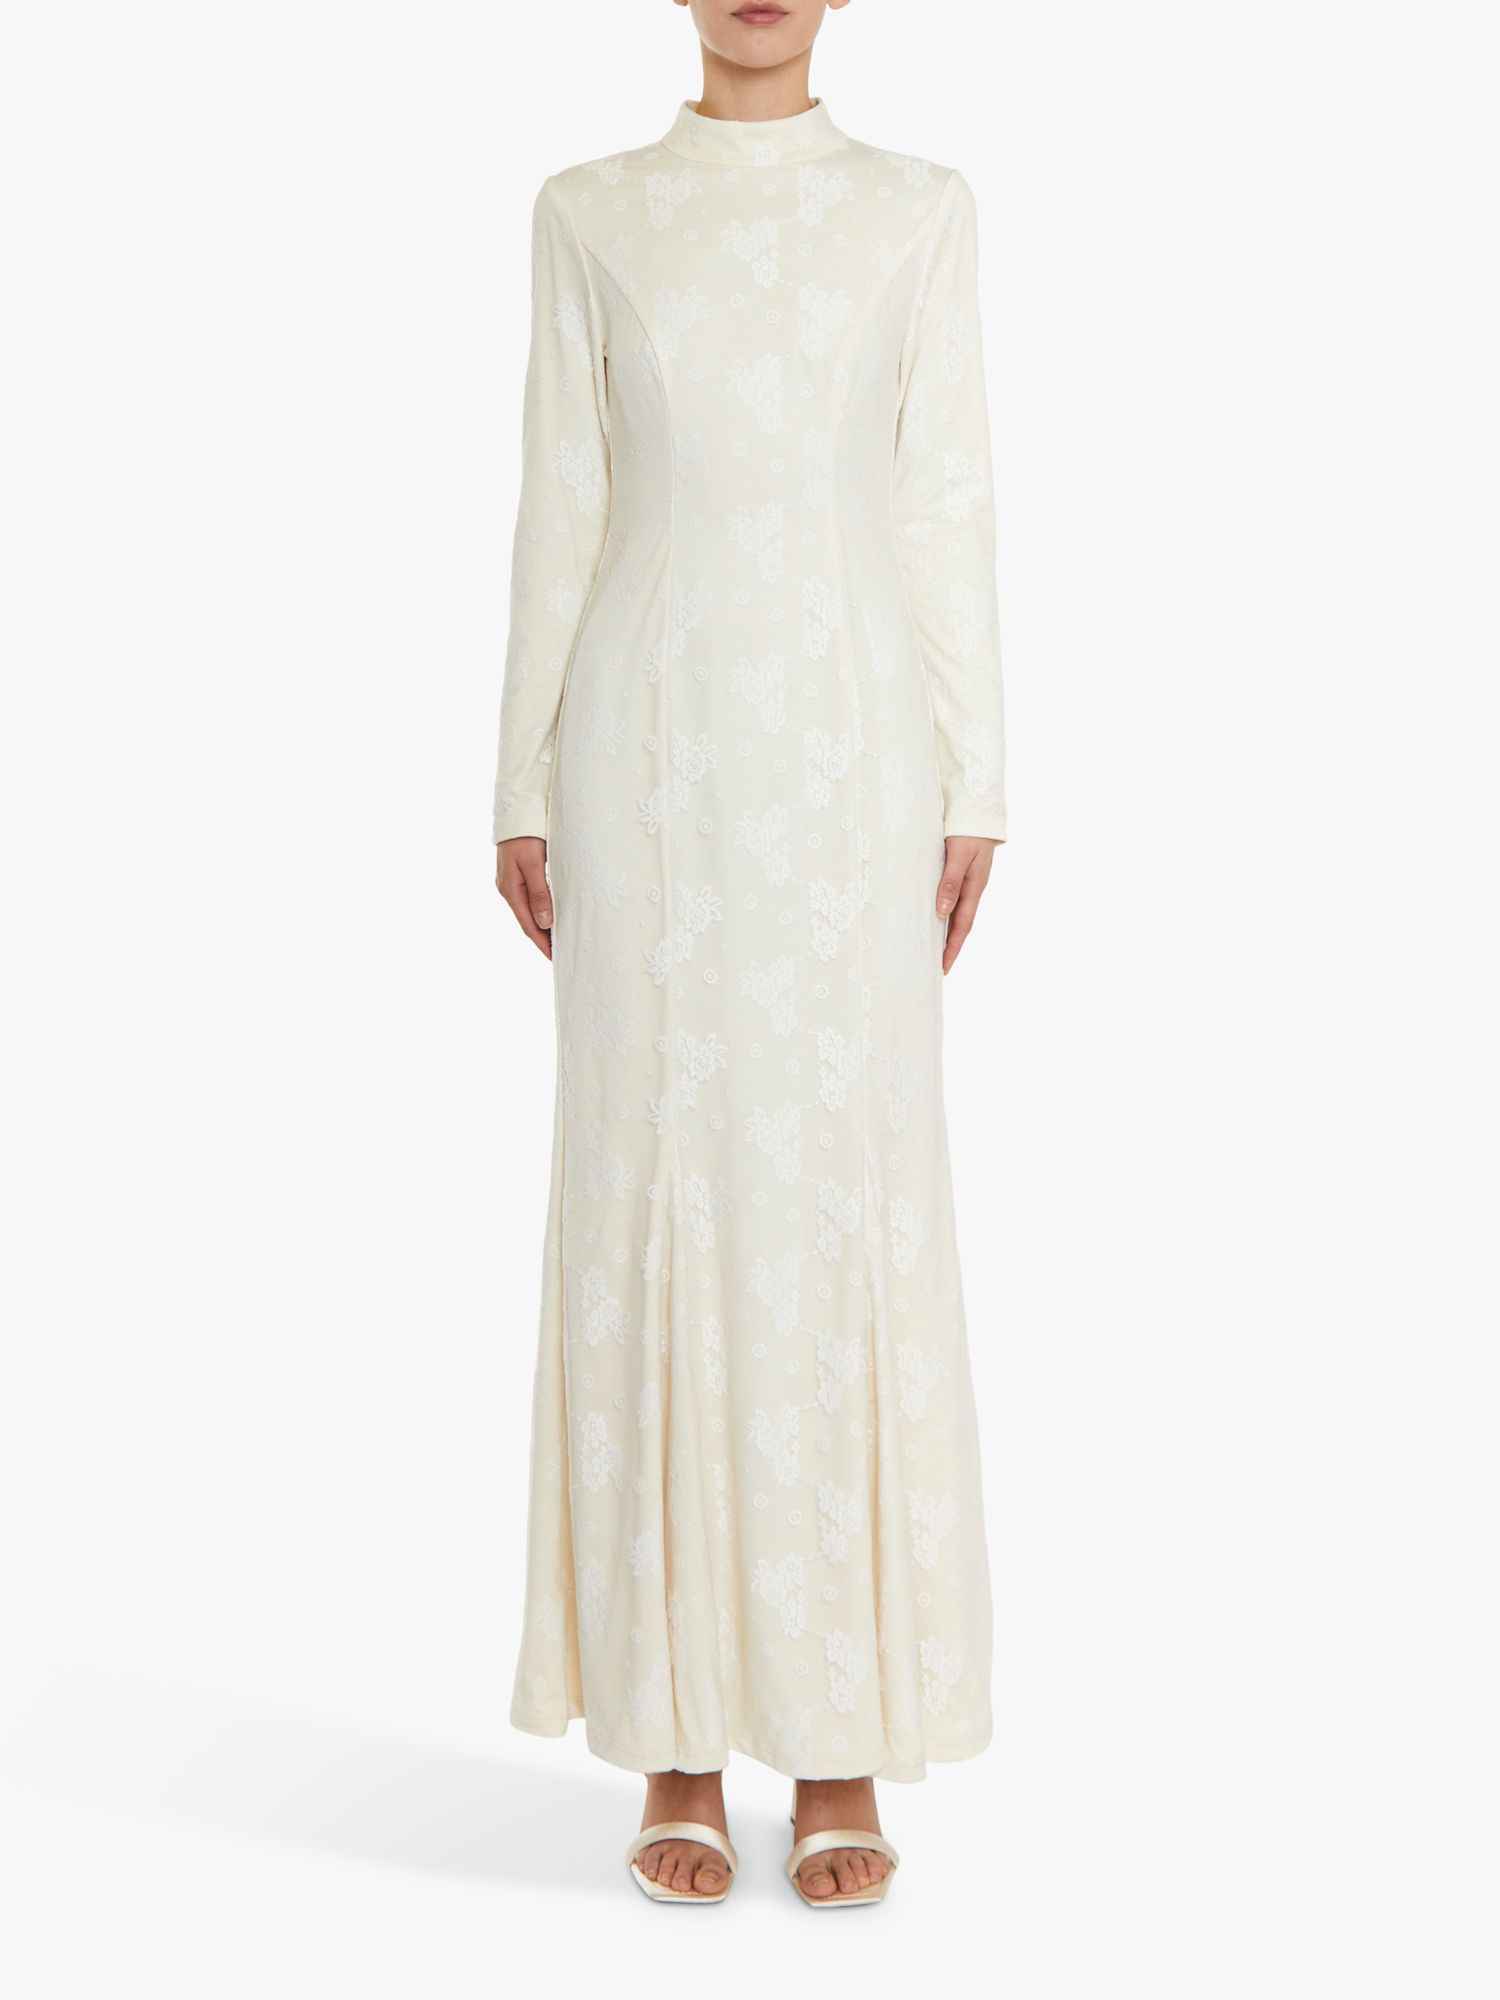 True Decadence Serenity Lace High Neck Maxi Dress, White at John Lewis ...